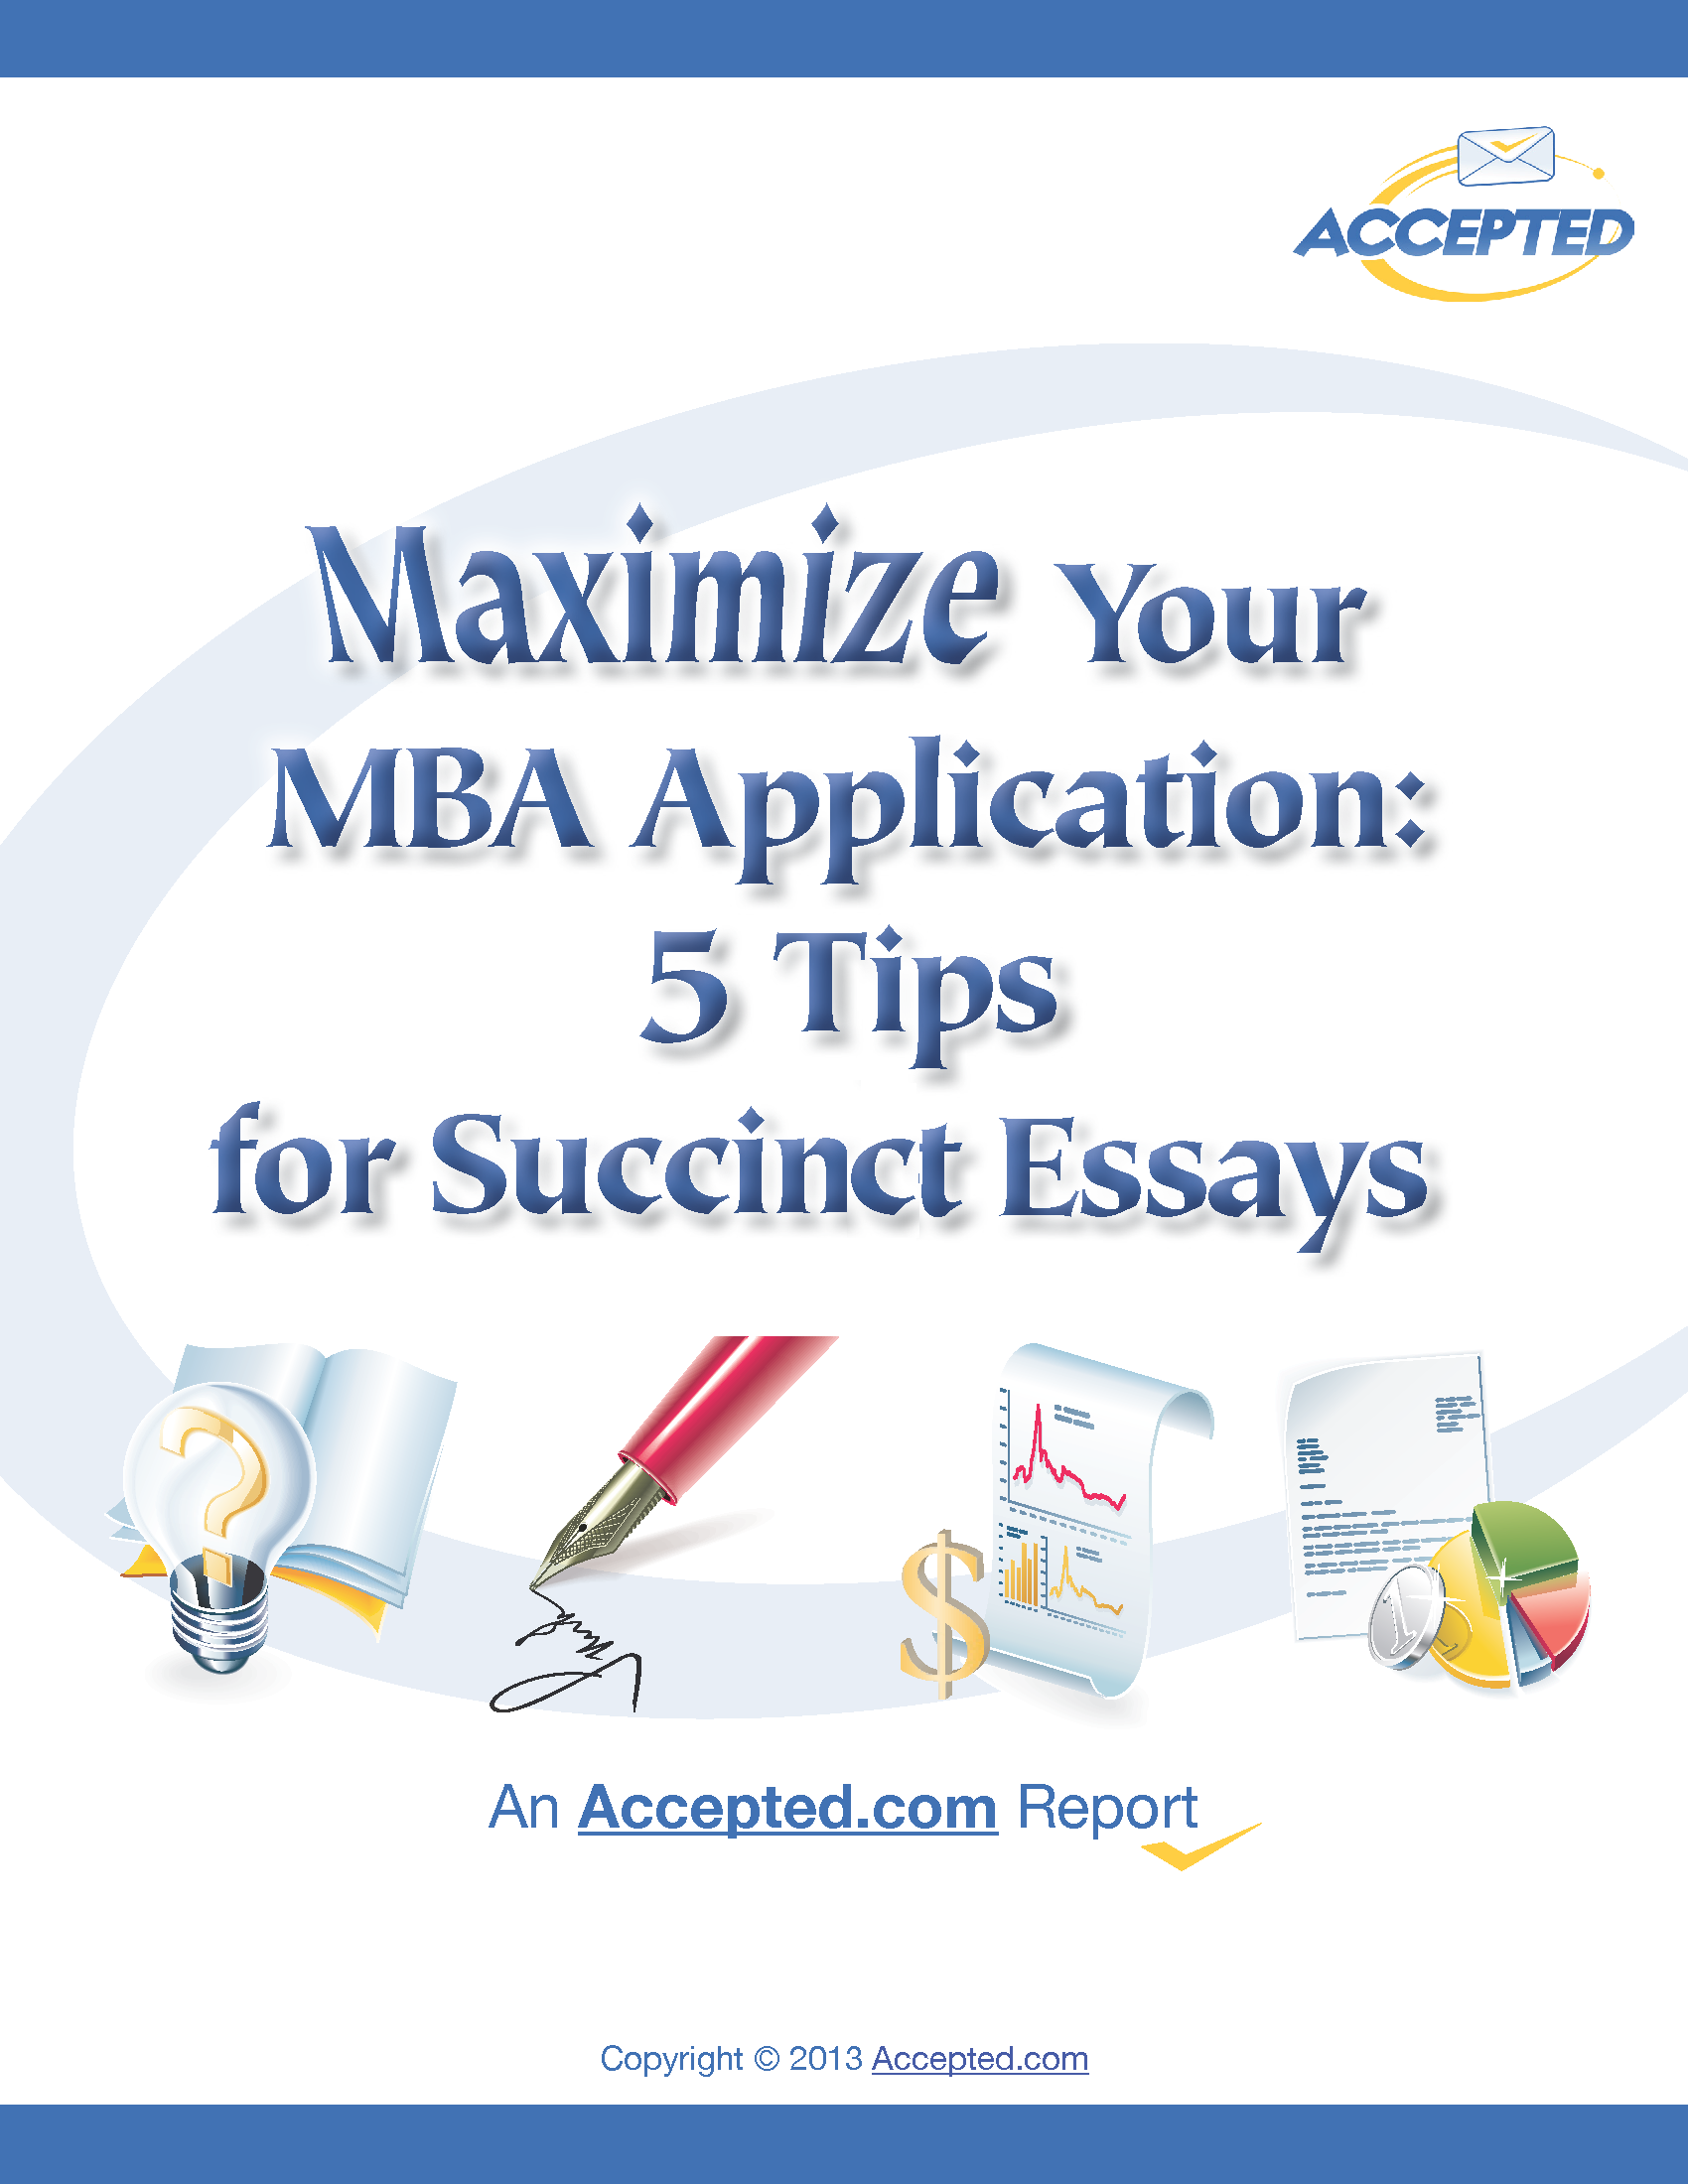 Mba admission essay writing services online